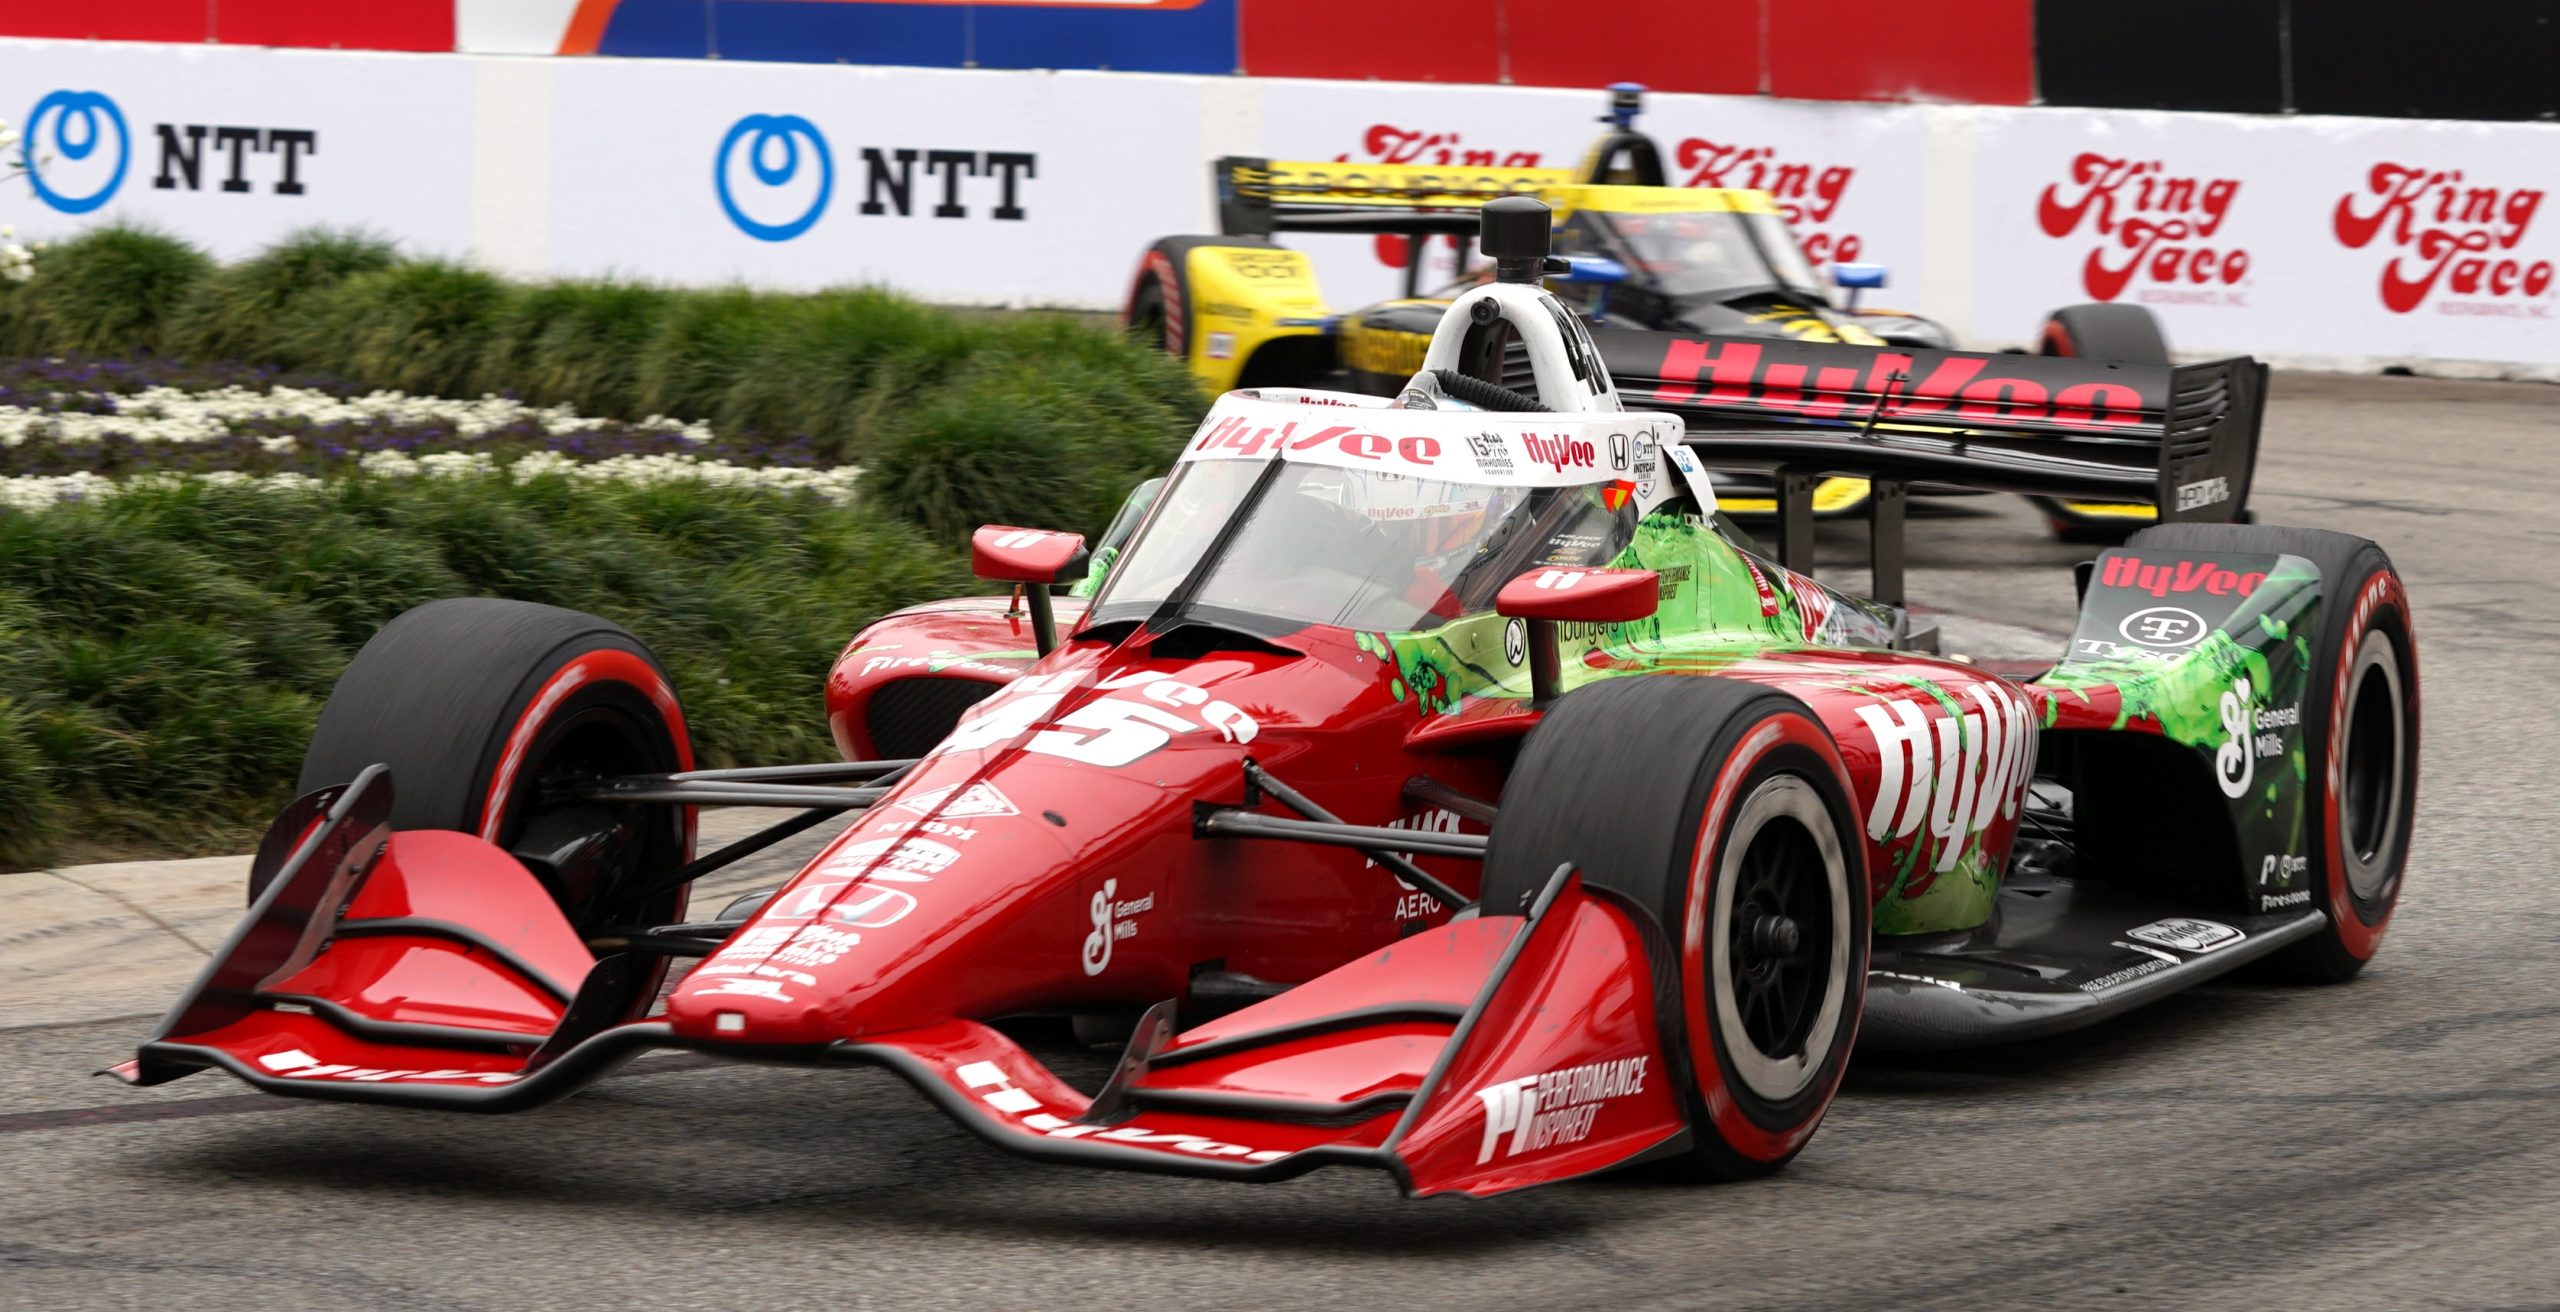 Here Askew is shown leading eventual winner Colton Herta through the fountain area (T3) during the race. In his short NTT IndyCar Series career, Askew has already earned a podium finish.